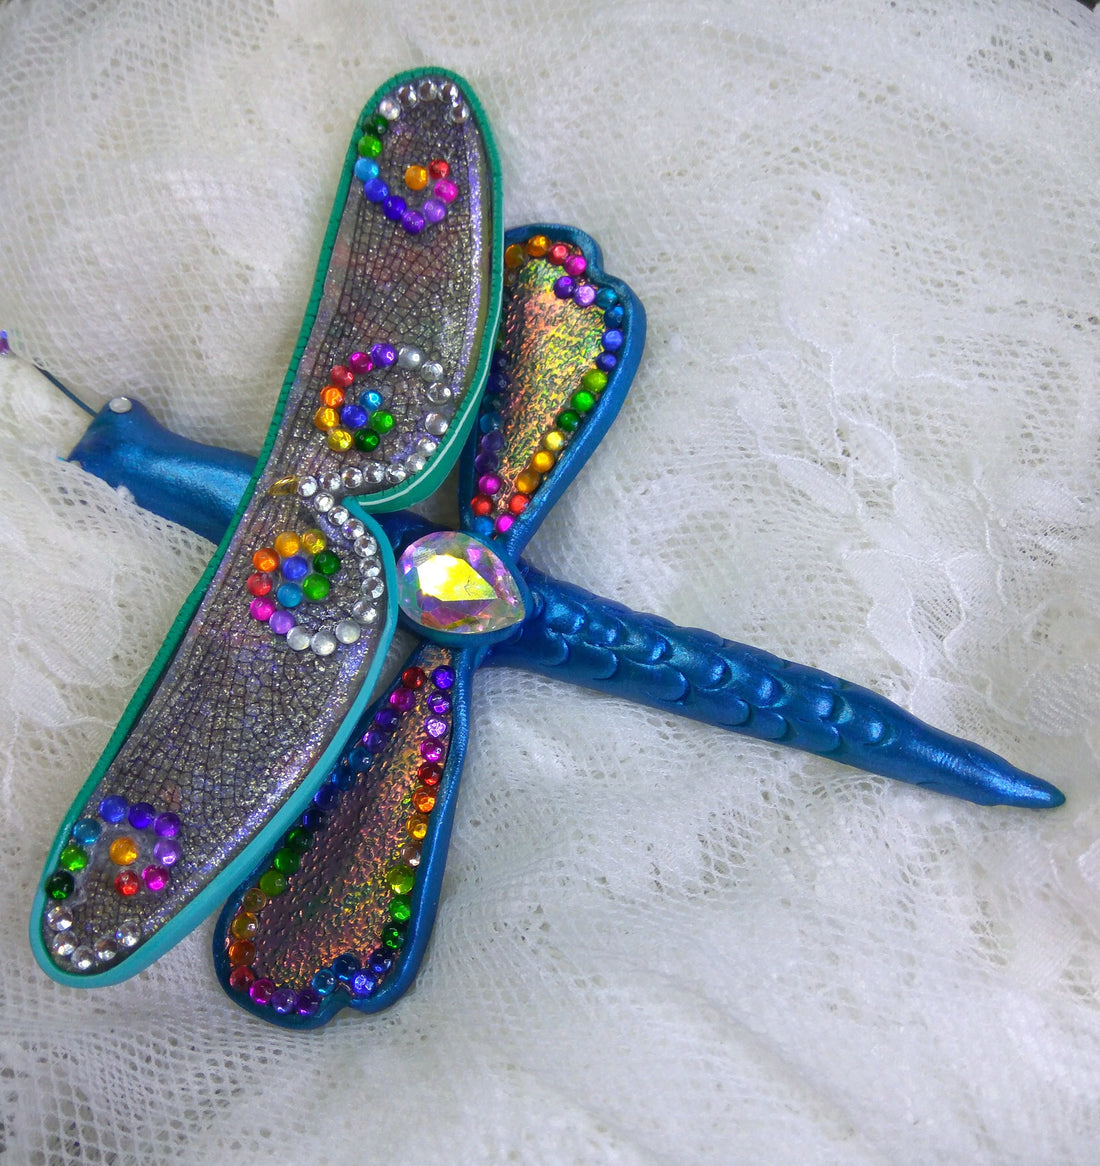 Reina Dragonfly & Earrings Galore - Dragonfly Dreams Create Along Box